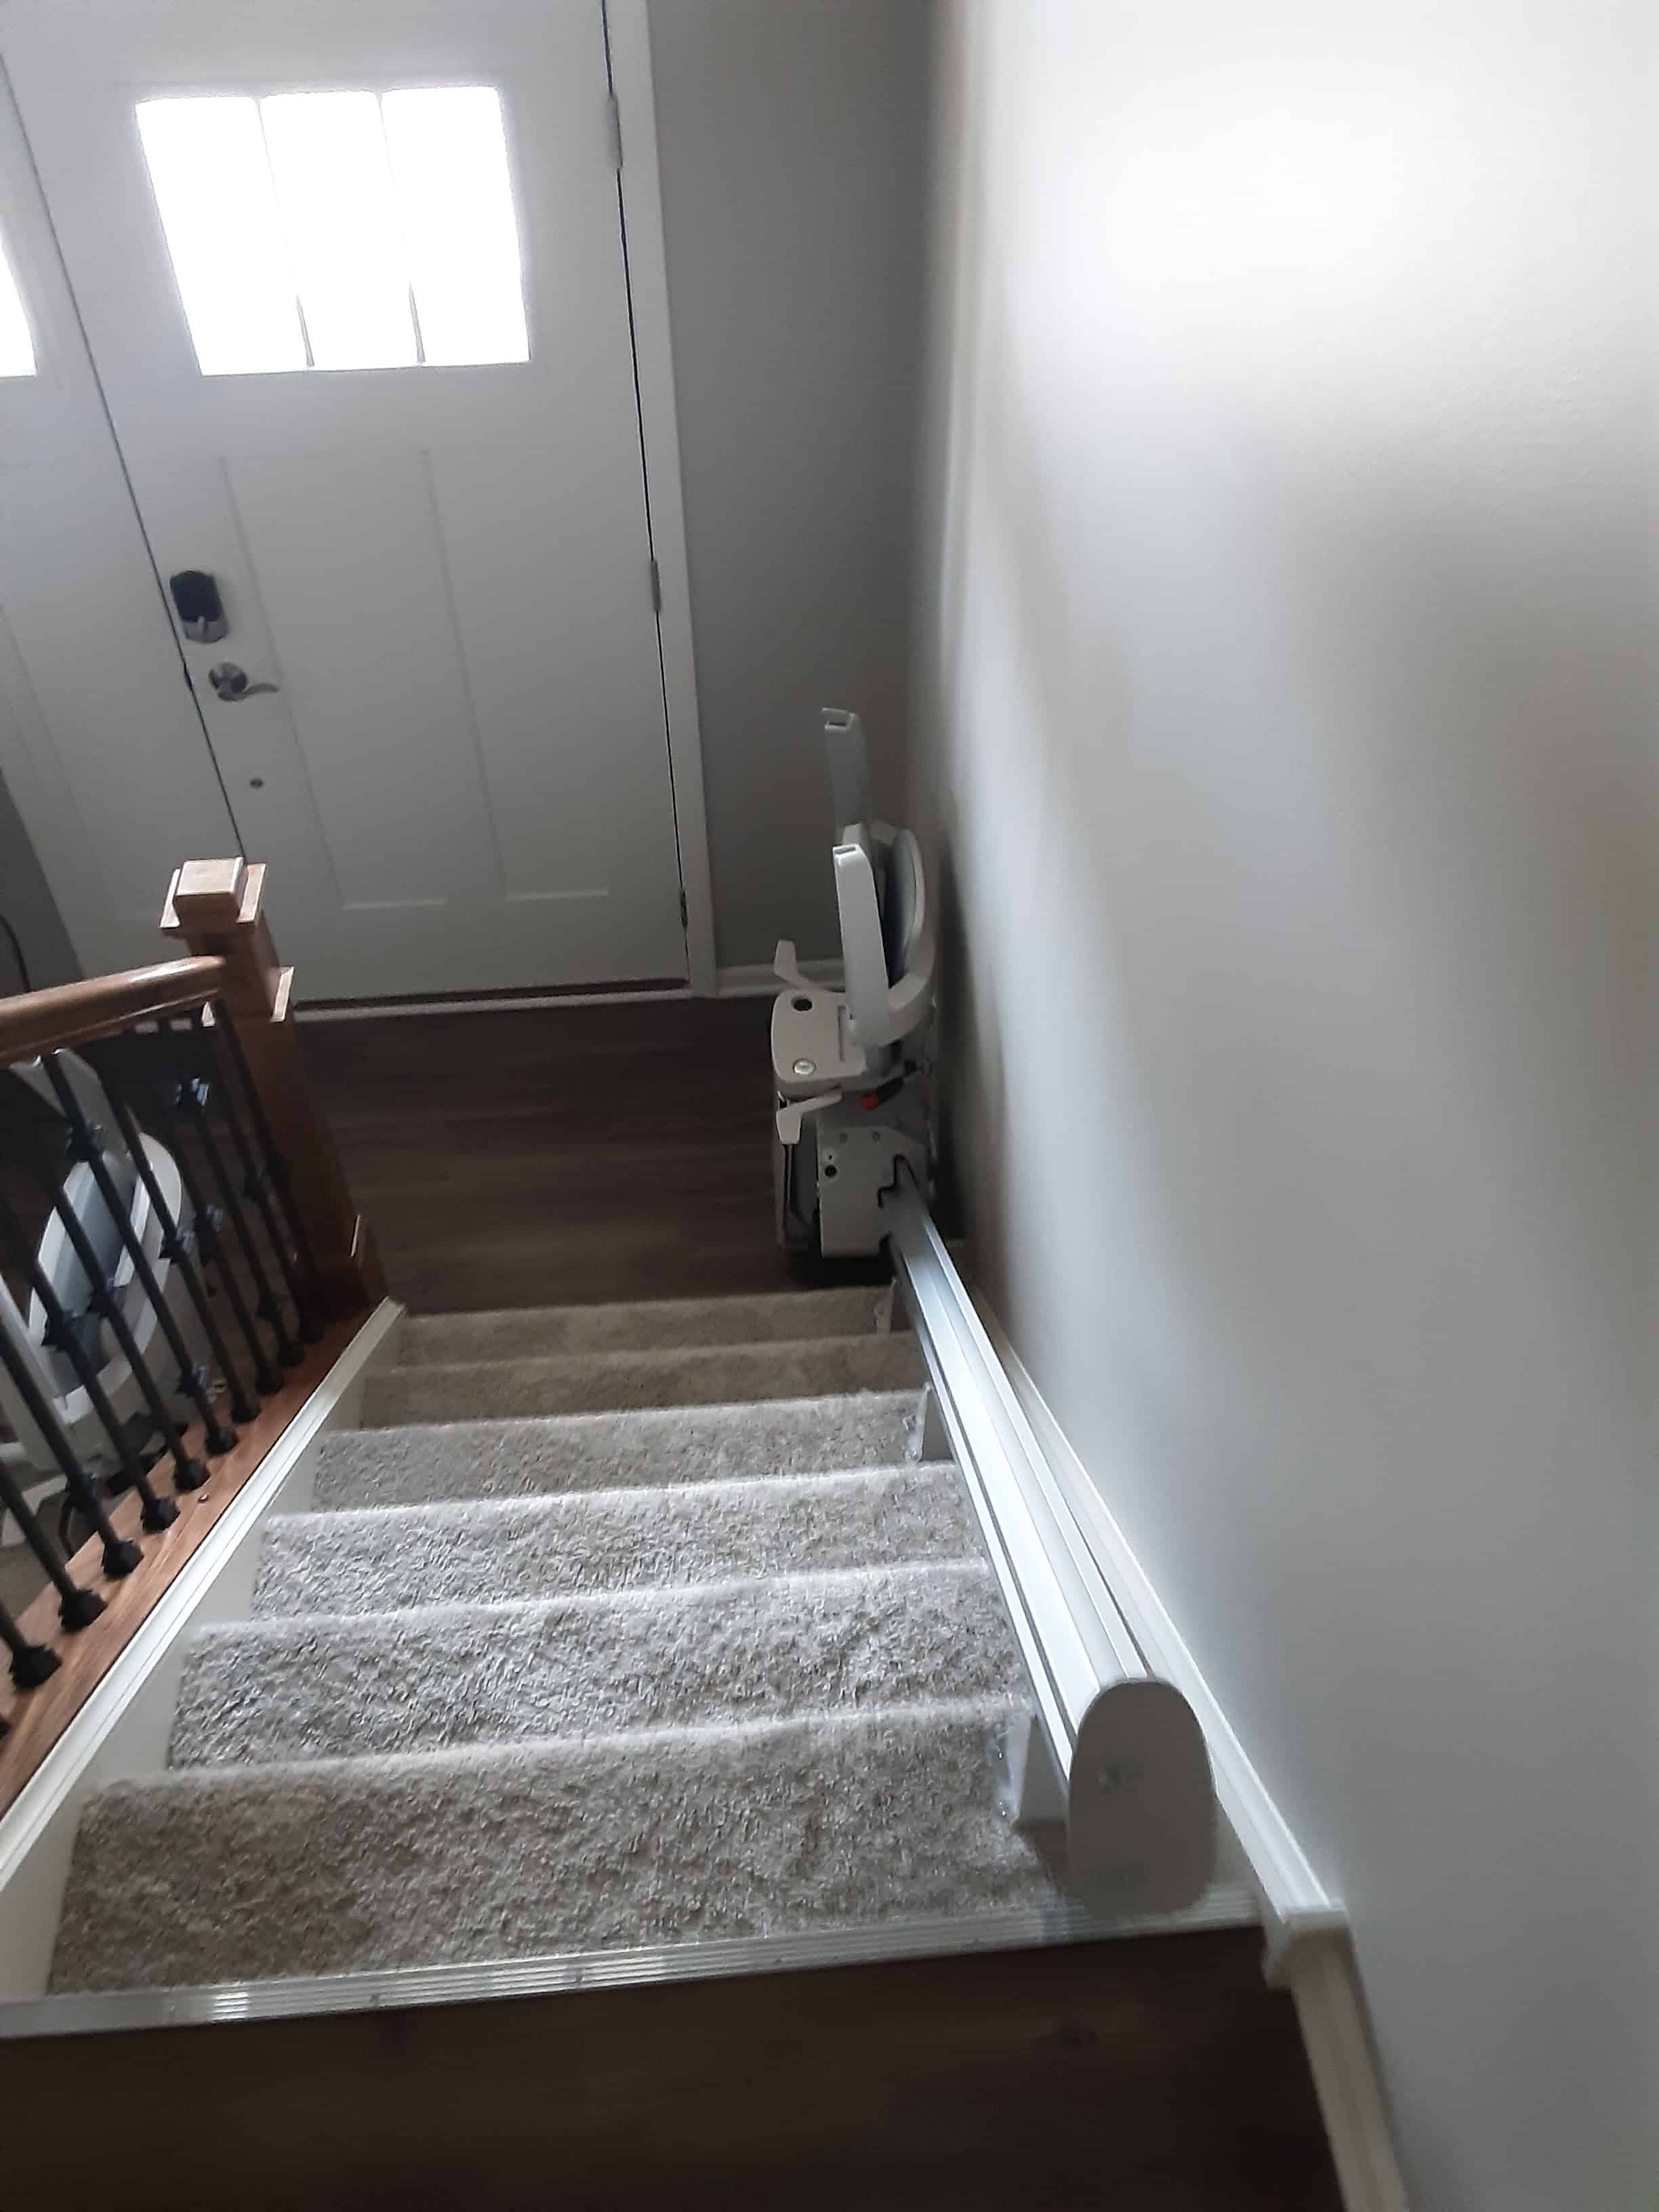 Straight stair lift in home in Illinois